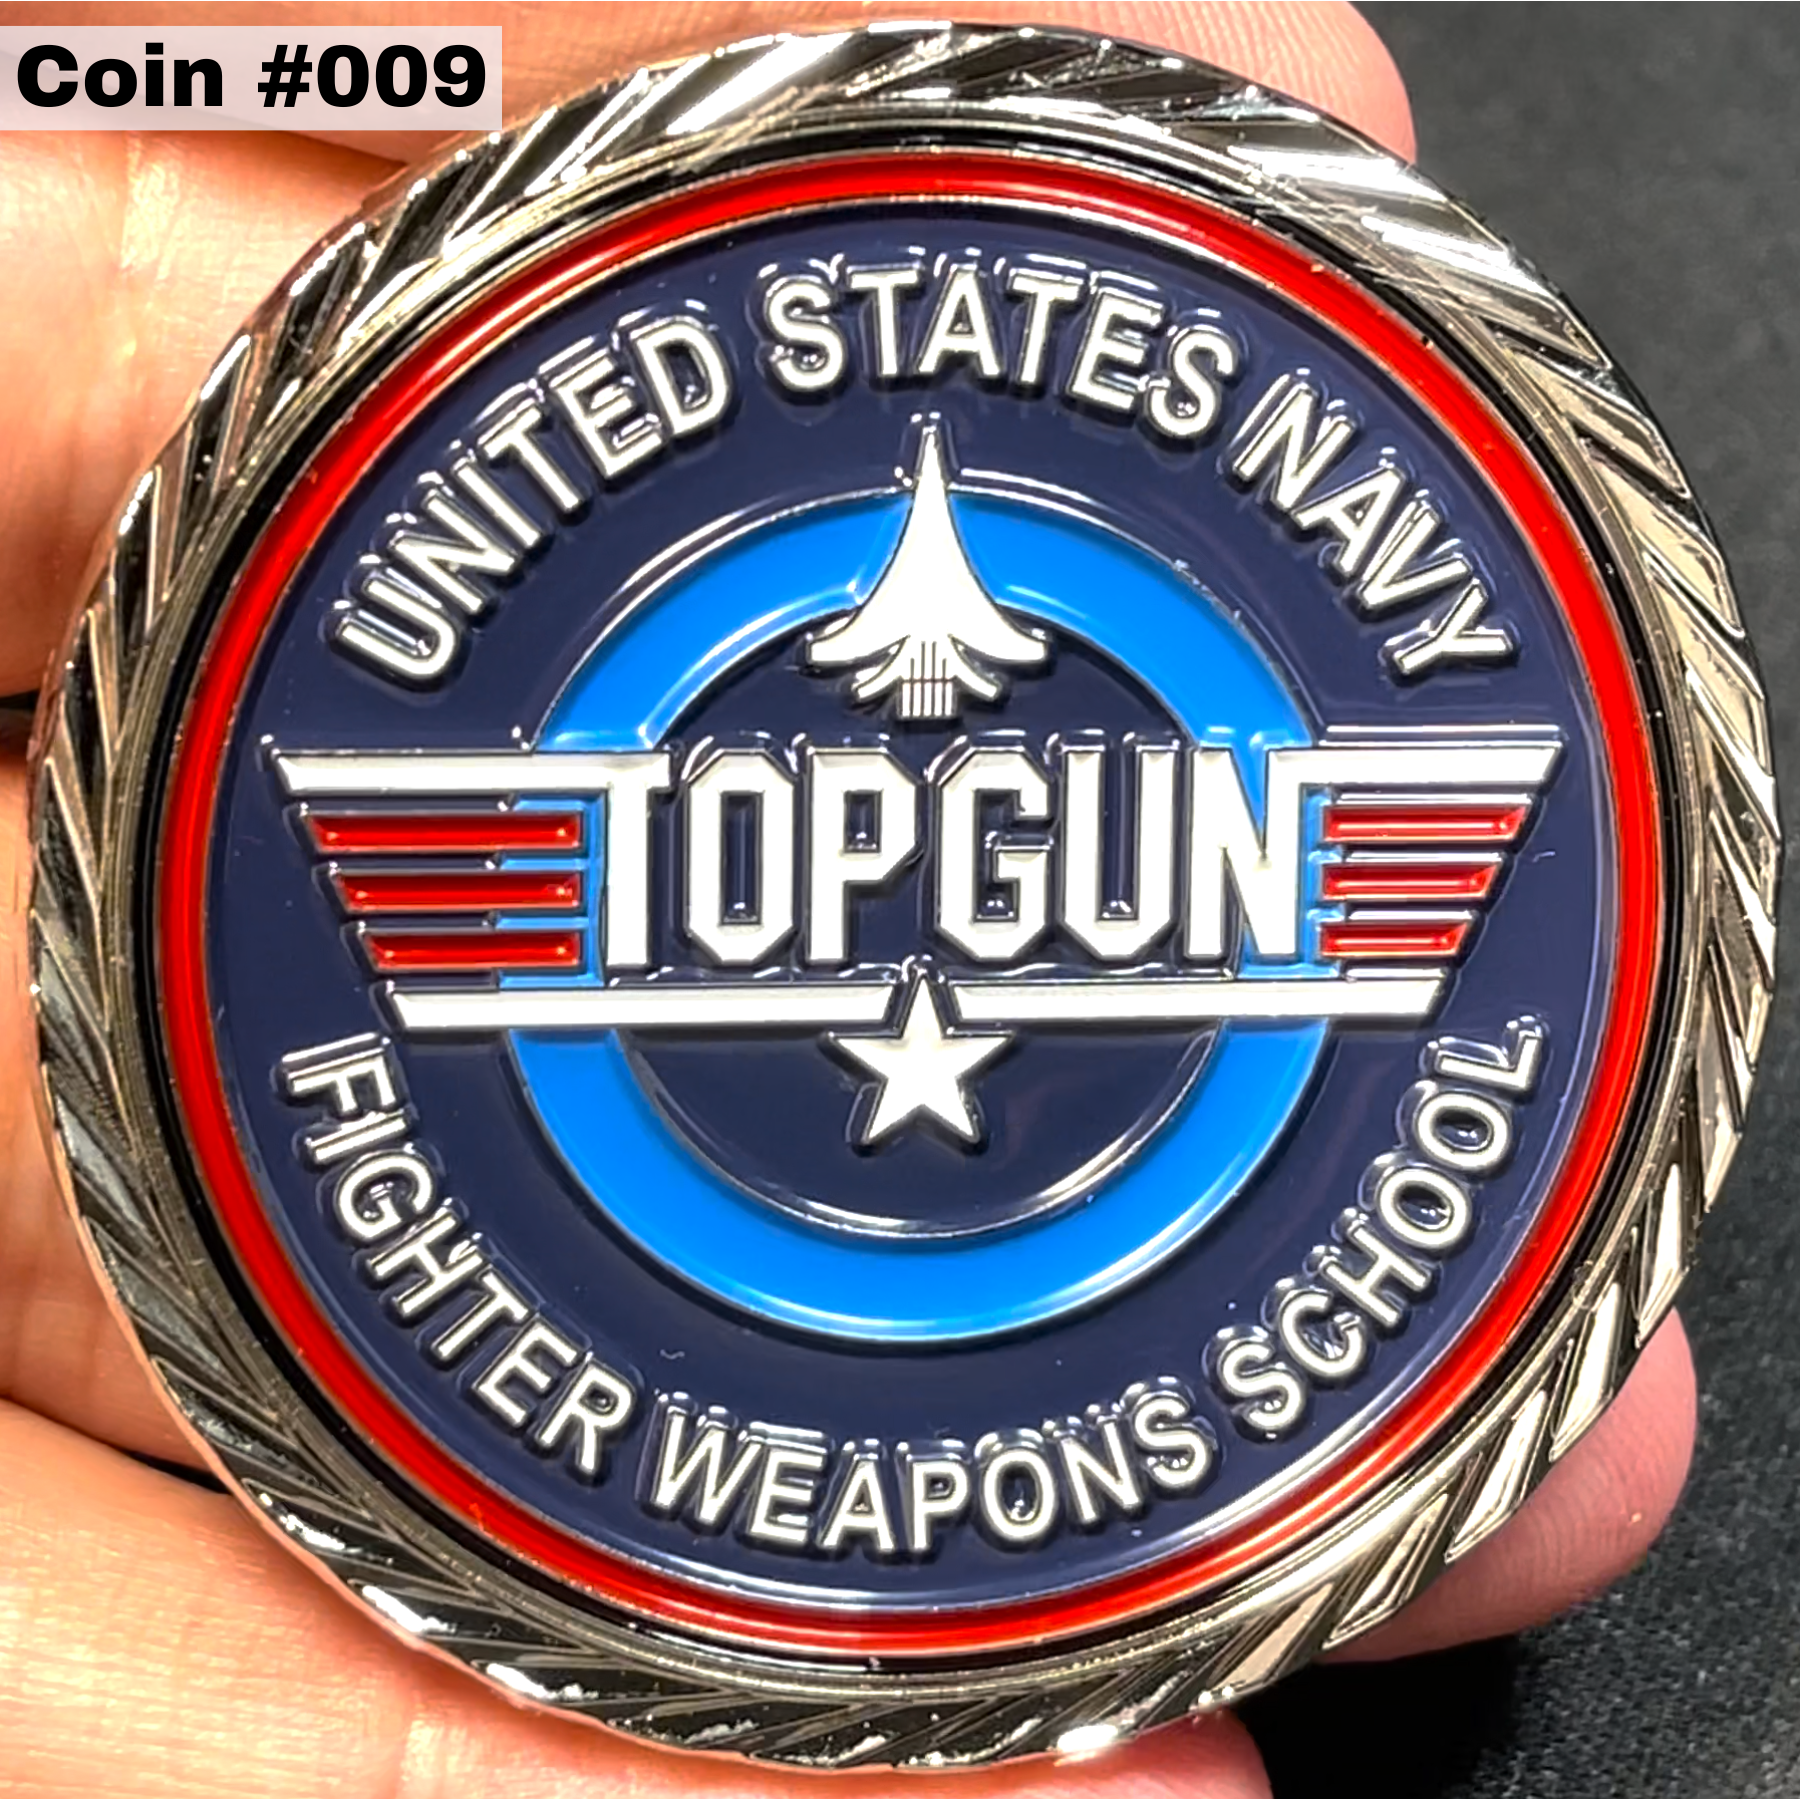 From Our Private Vault: Premium Numbered TOPGUN Challenge Coins Release